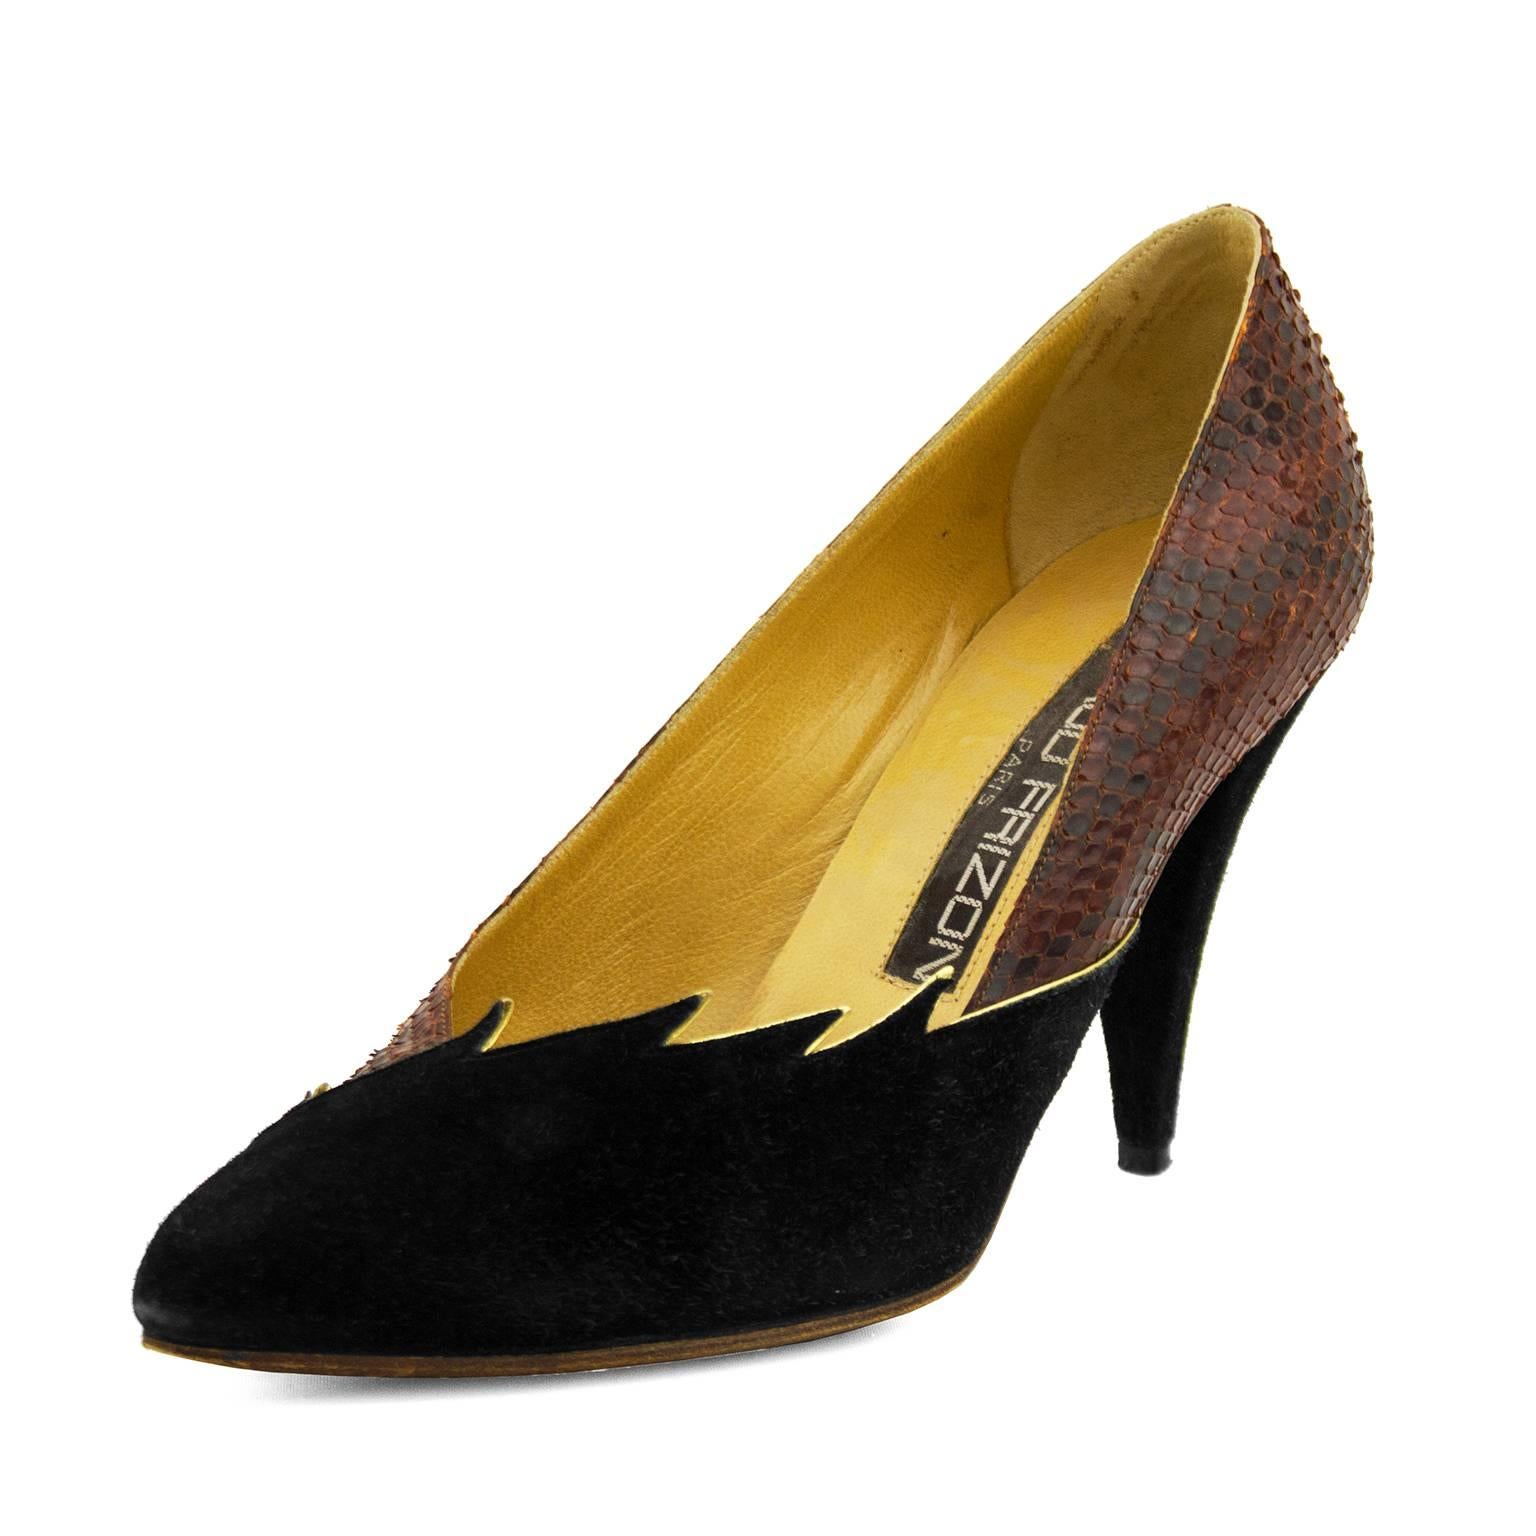 1980s Maud Frizon pumps featuring brown snake skin and black suede with gold trim. Tan leather interior with minimal wear. Tan leather exterior sole with slight signs of age and wear. Black suede heel. Excellent vintage condition. FR size 39 - may